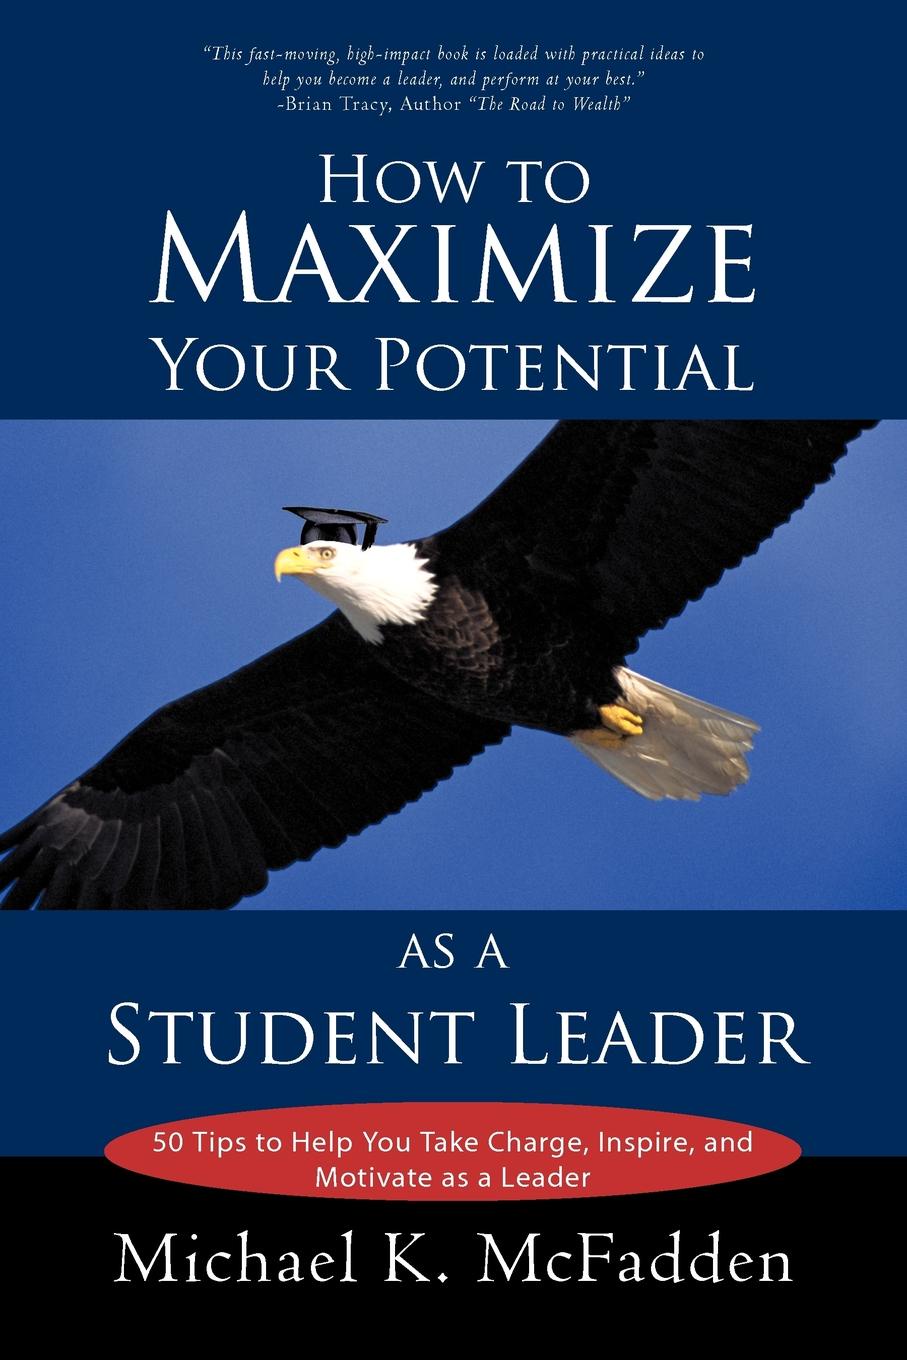 How to Maximize Your Potential as a Student Leader. 50 Tips to Help You Take Charge, Inspire, and Motivate as a Leader